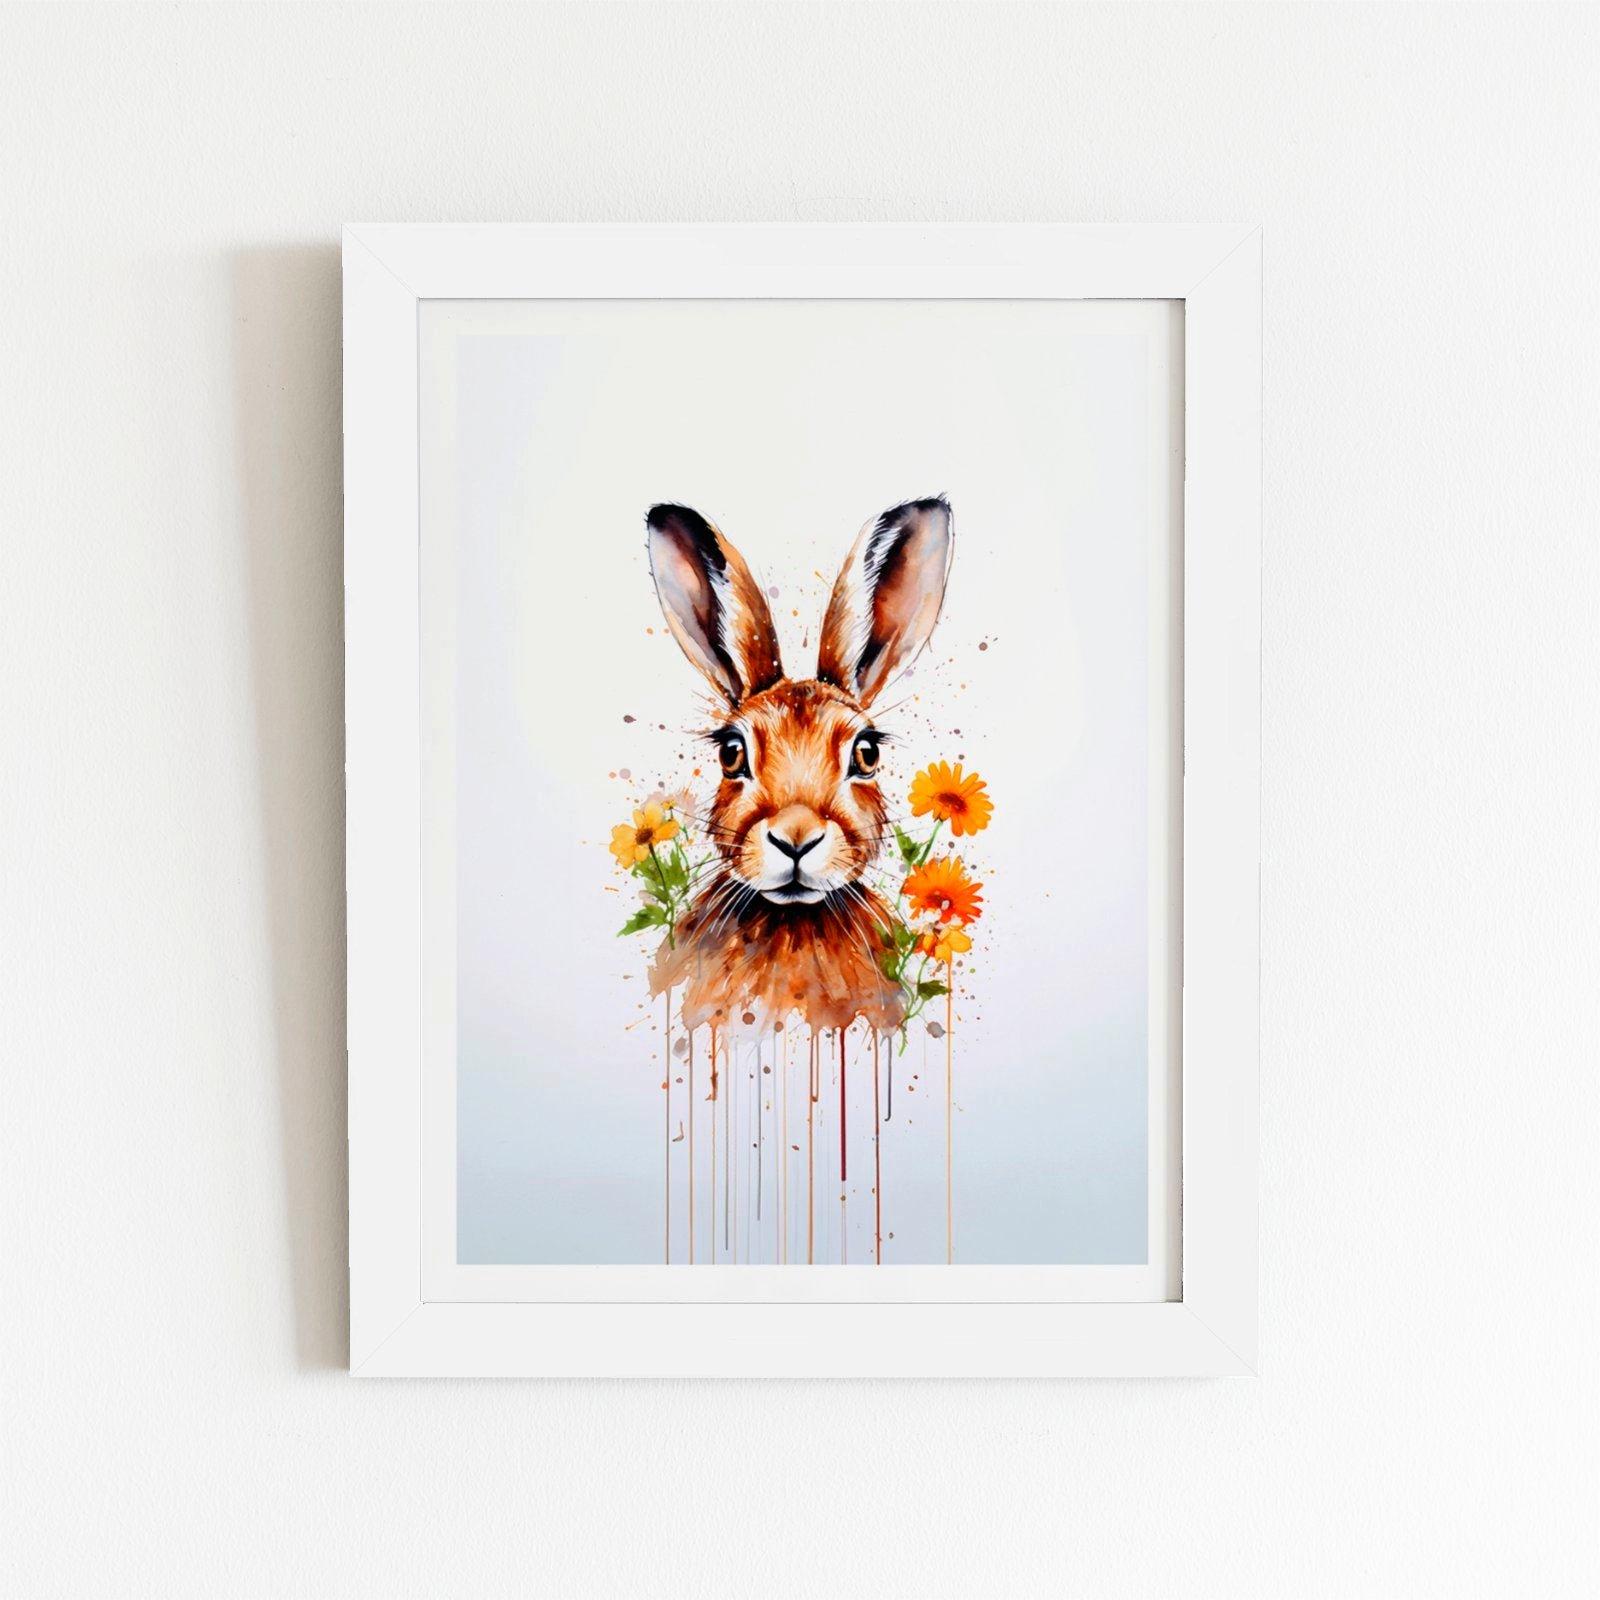 Watercolour Hare and Daisies Framed Art Print